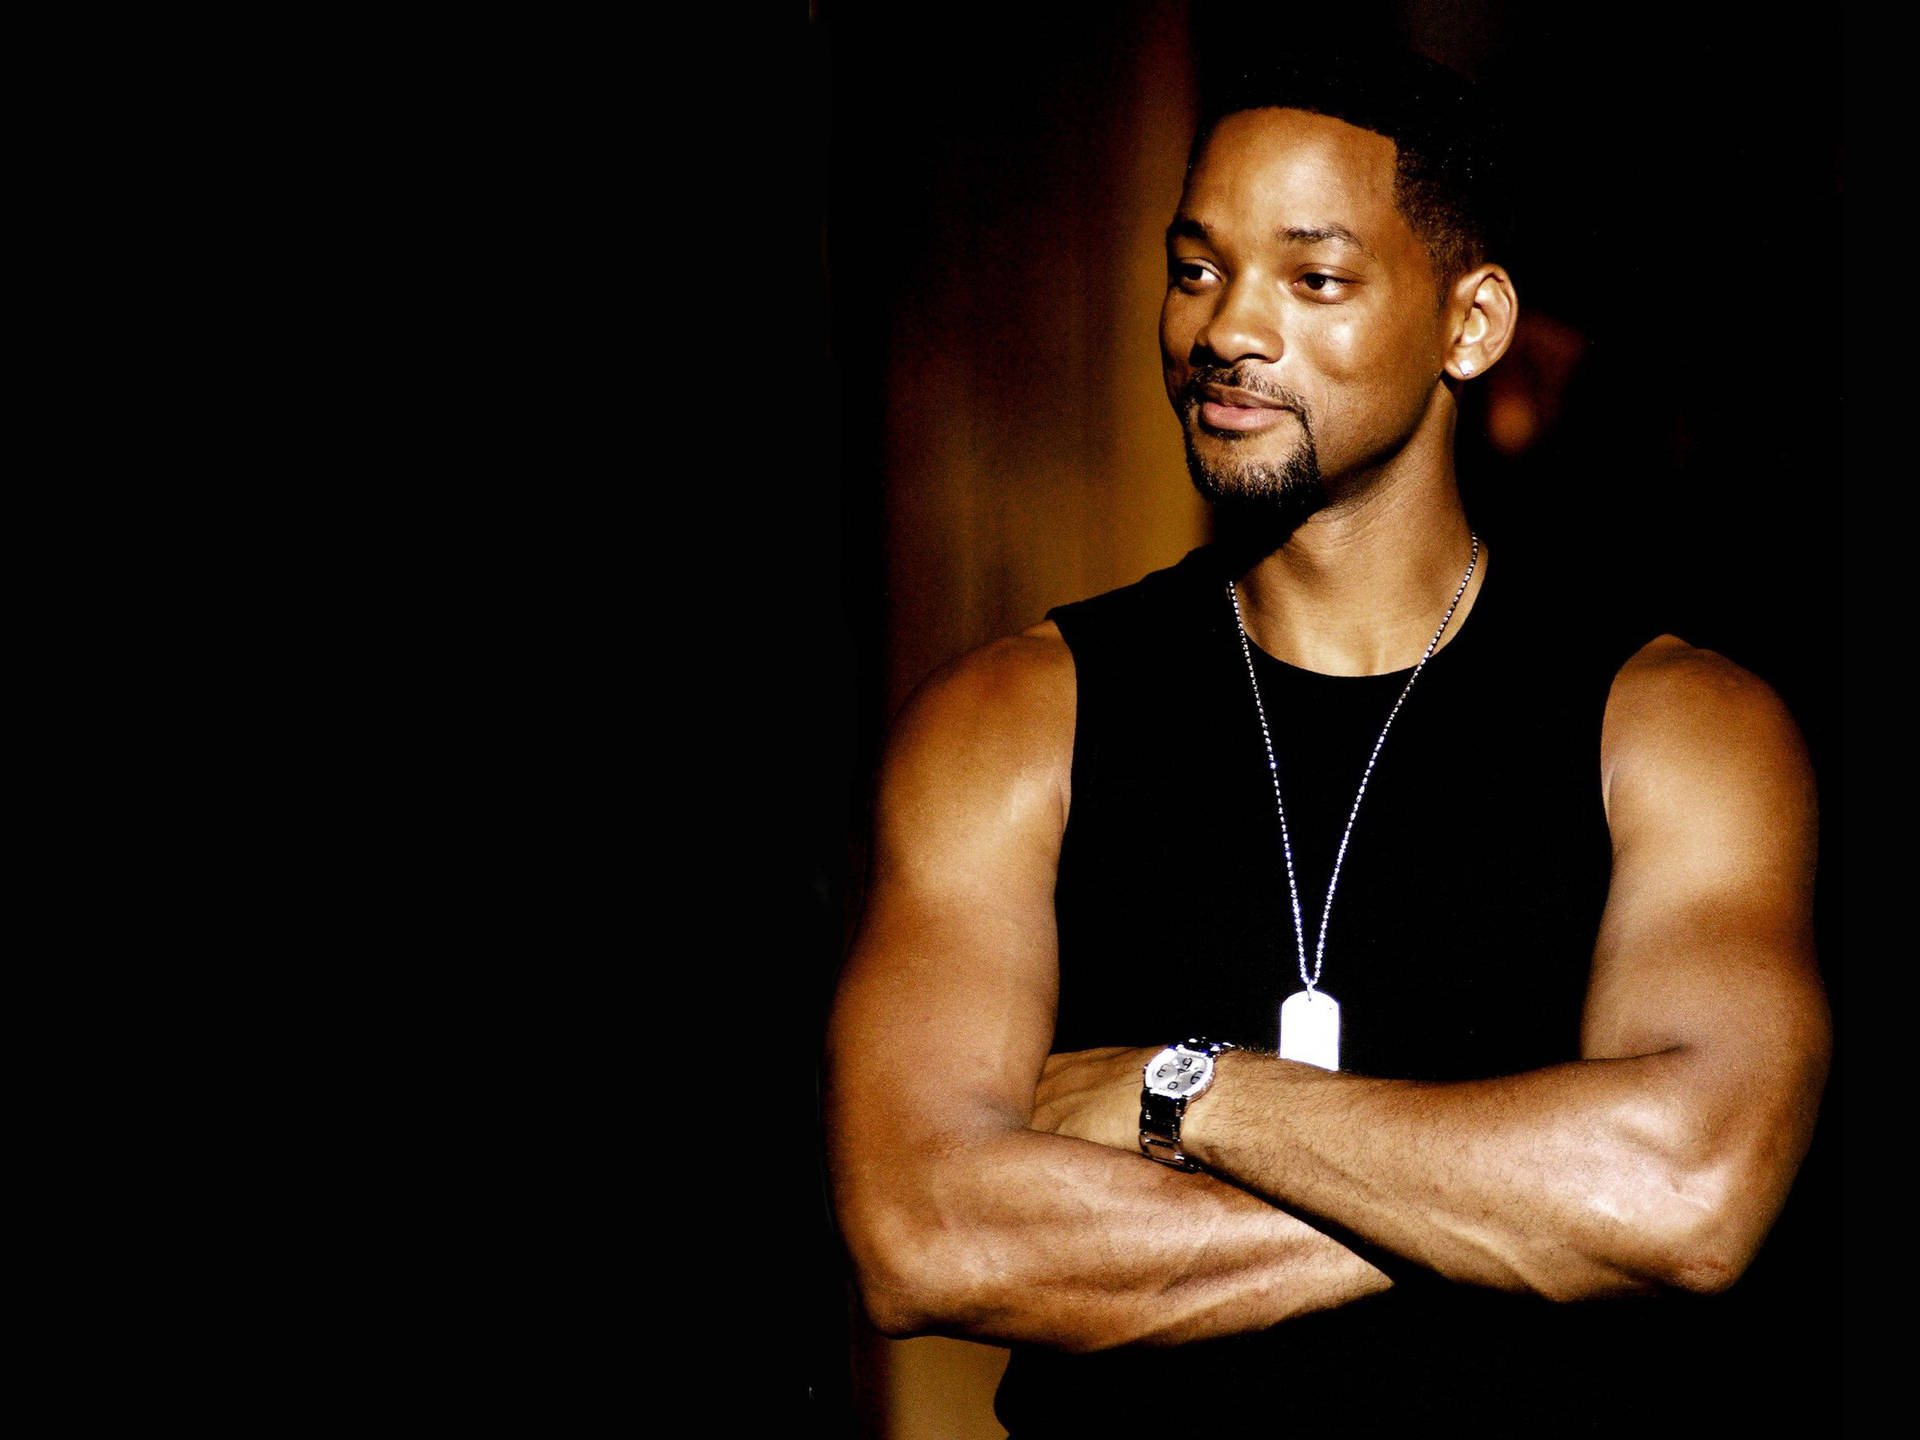 100+] Will Smith Wallpapers 